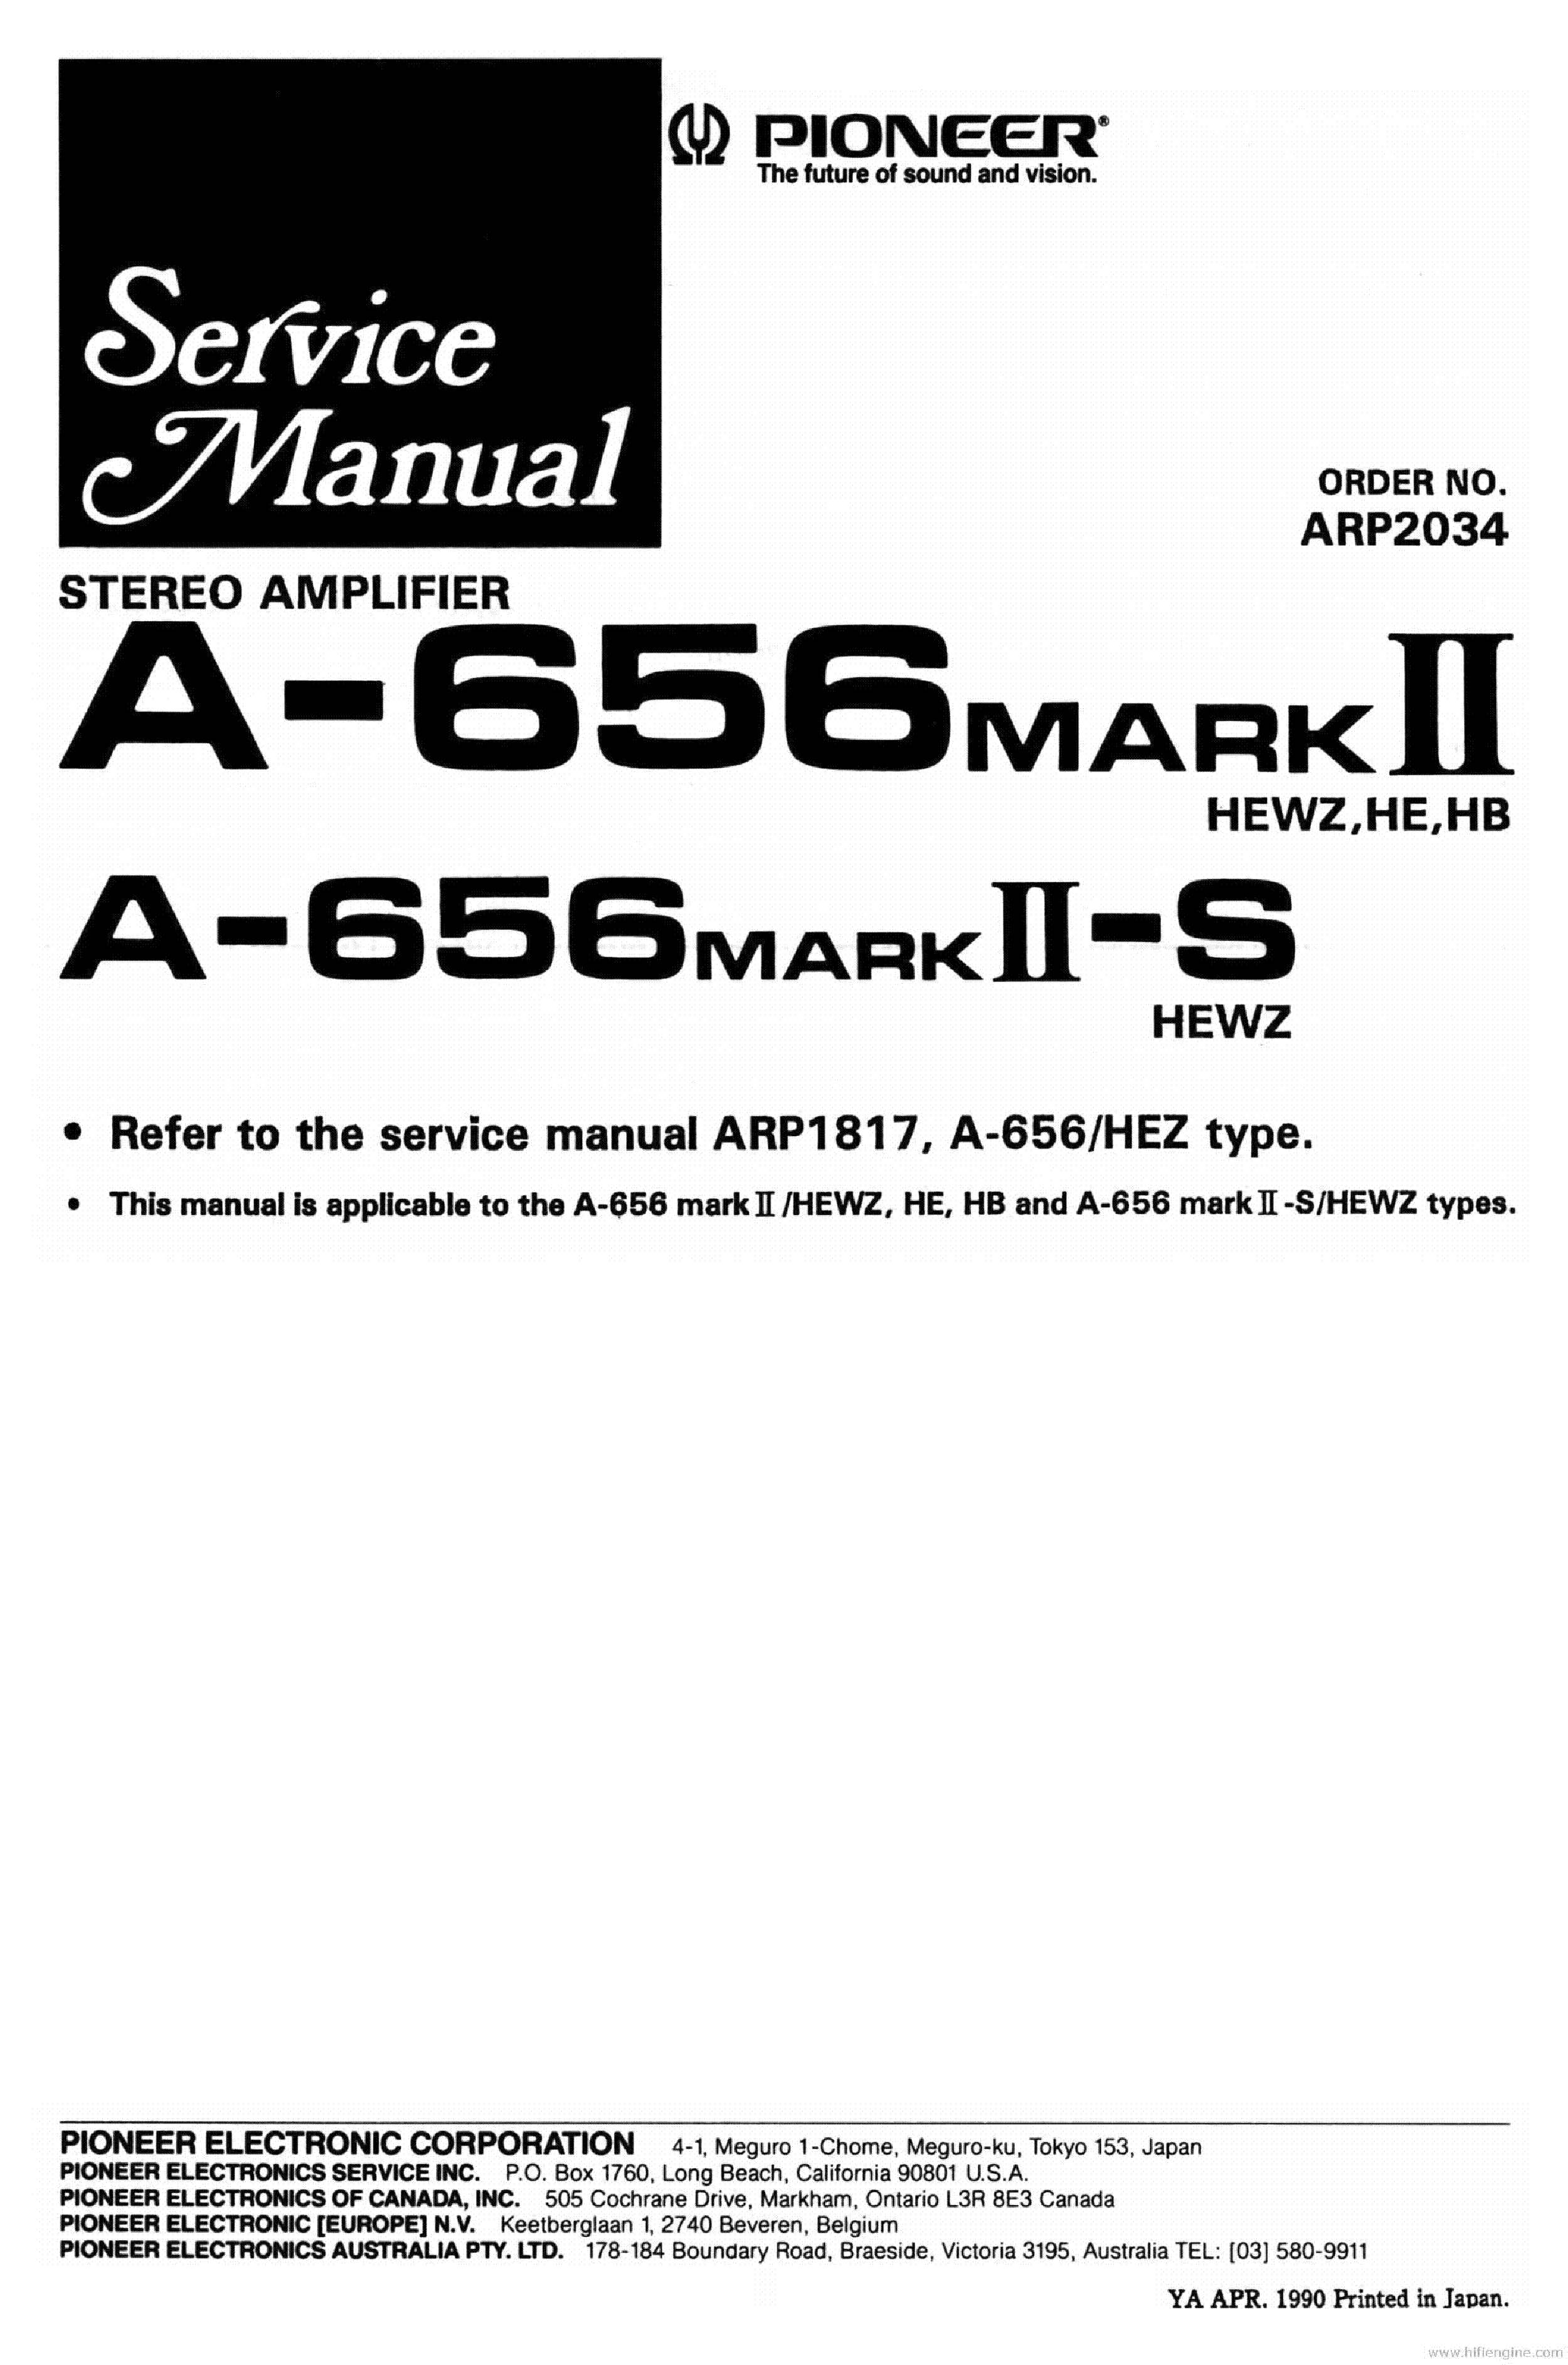 PIONEER A-656 MKII-S STEREO AMPLIFIER 1990 SM service manual (1st page)